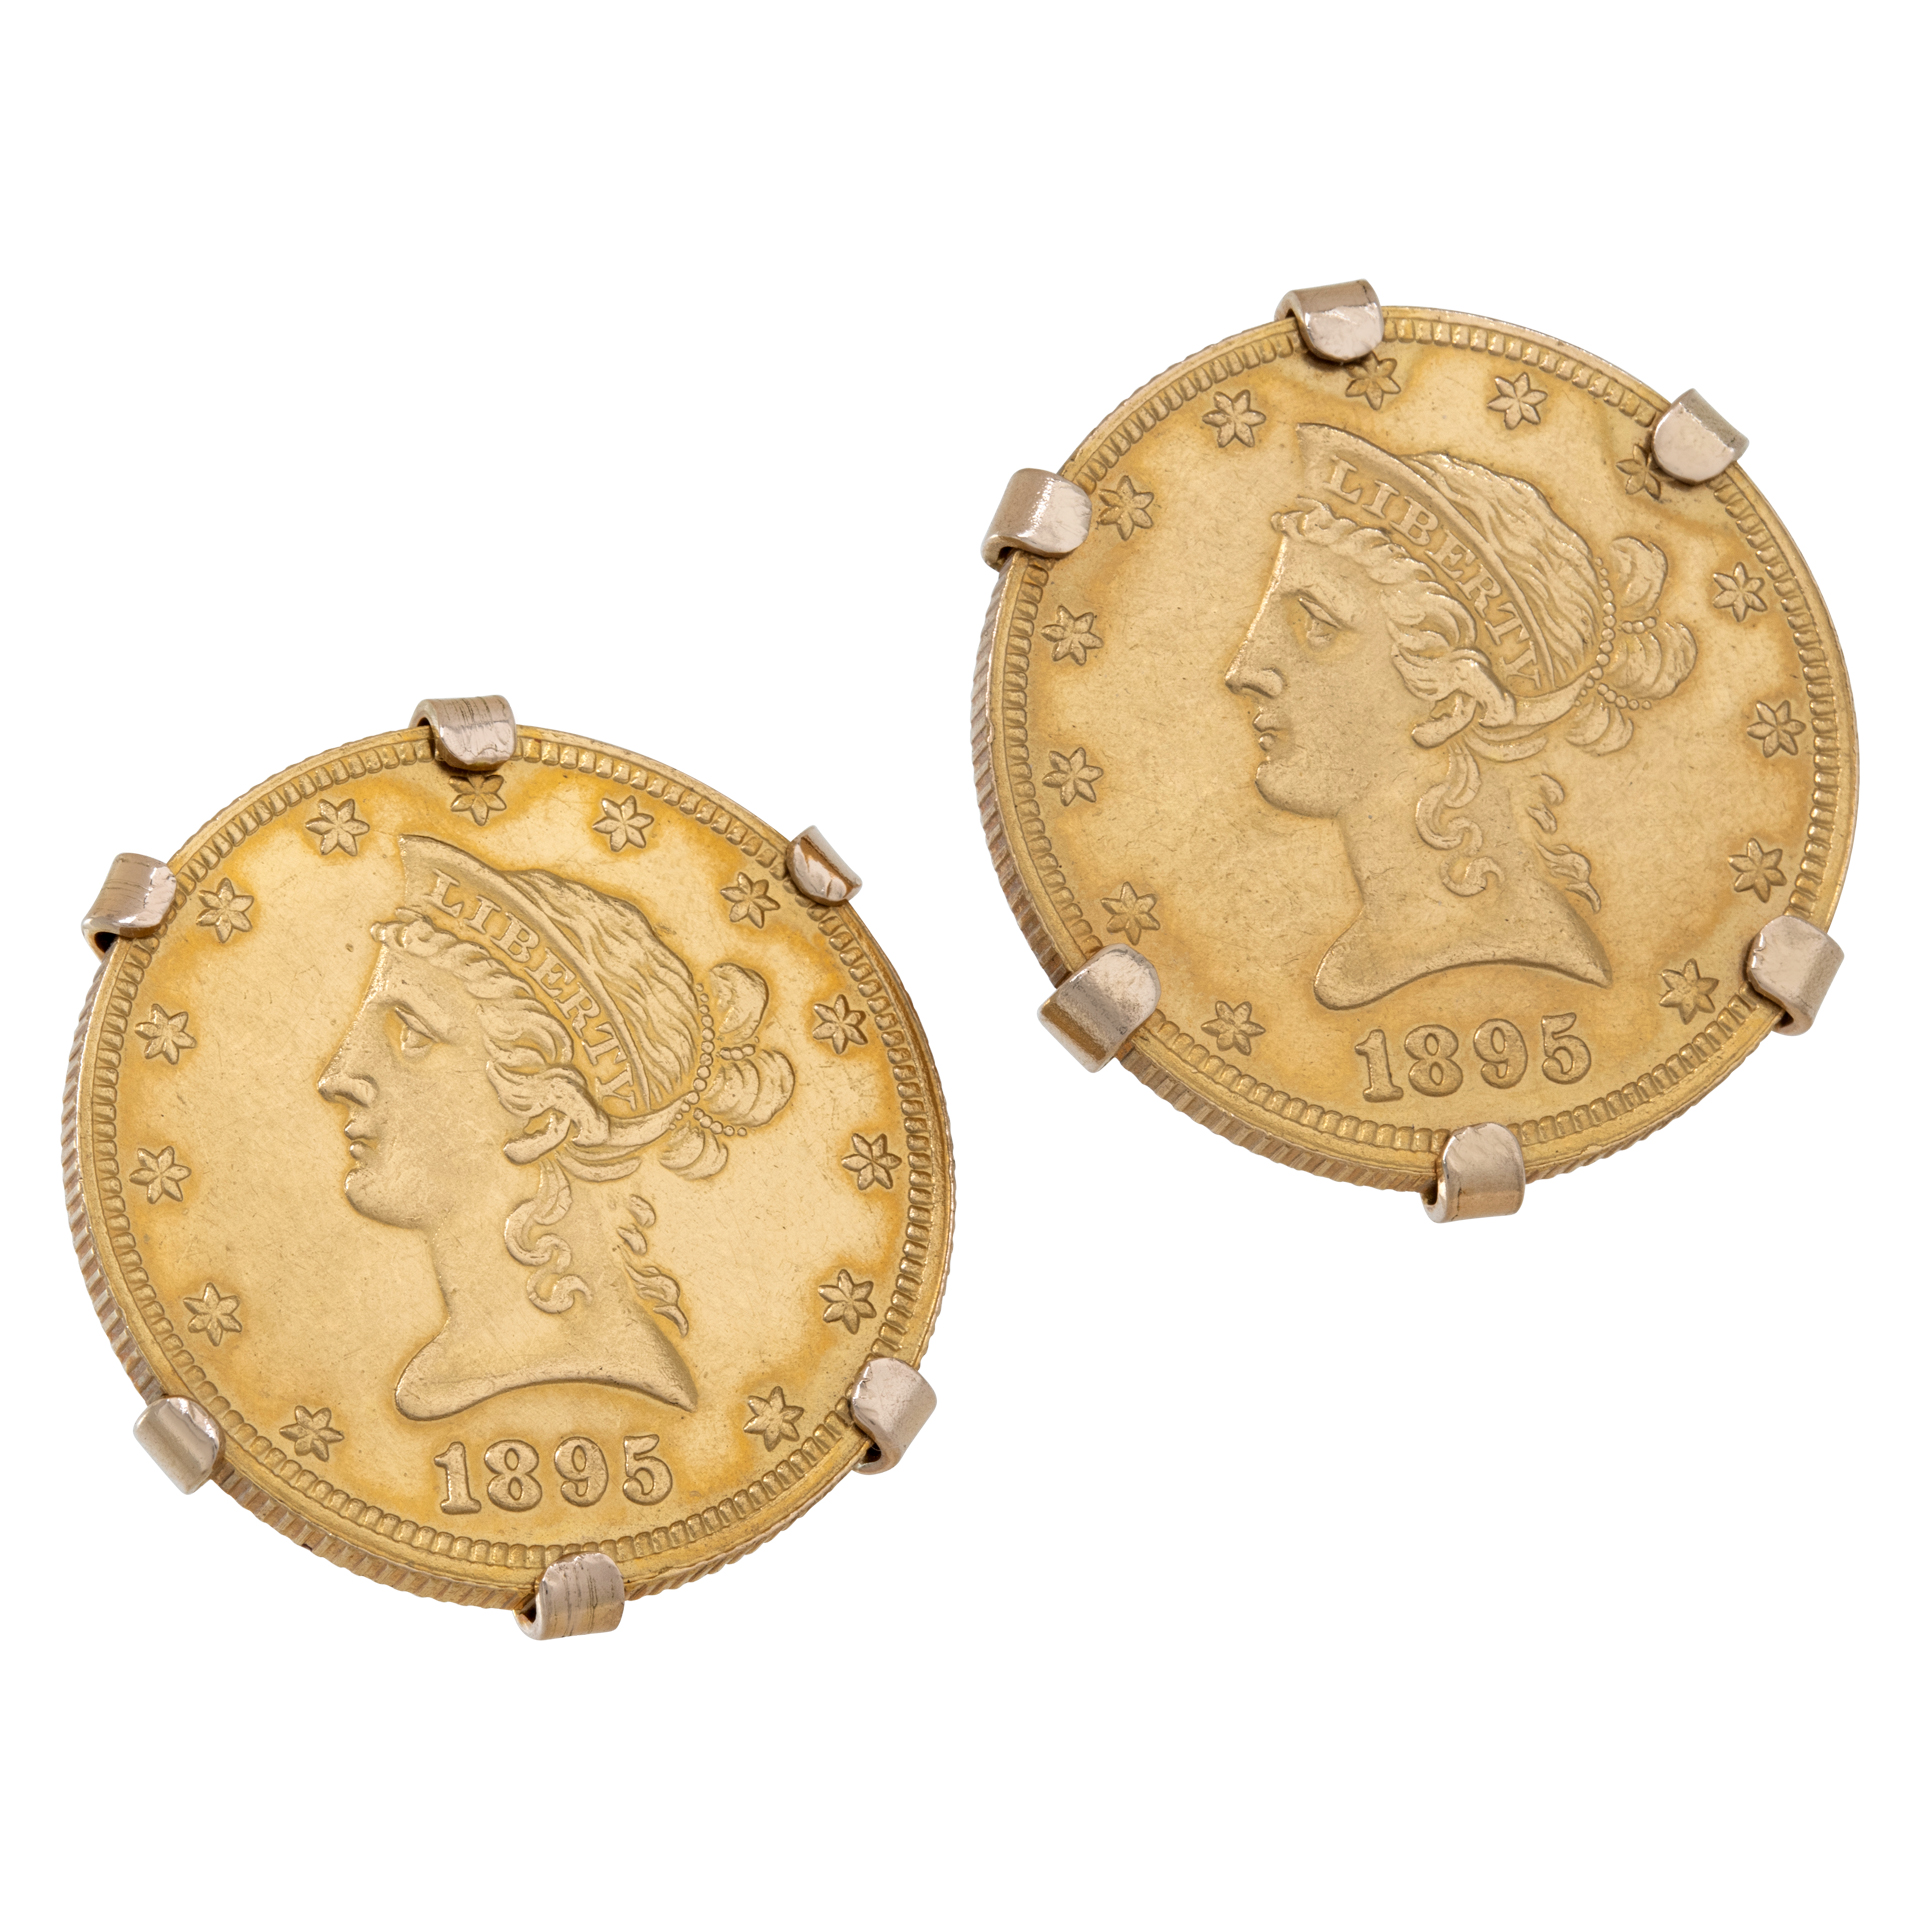 Pair of $10 US gold coins dated 1895 mounted as cufflinks in 14Kt yellow gold frame. Diameter: 25mm (1.00 inch).